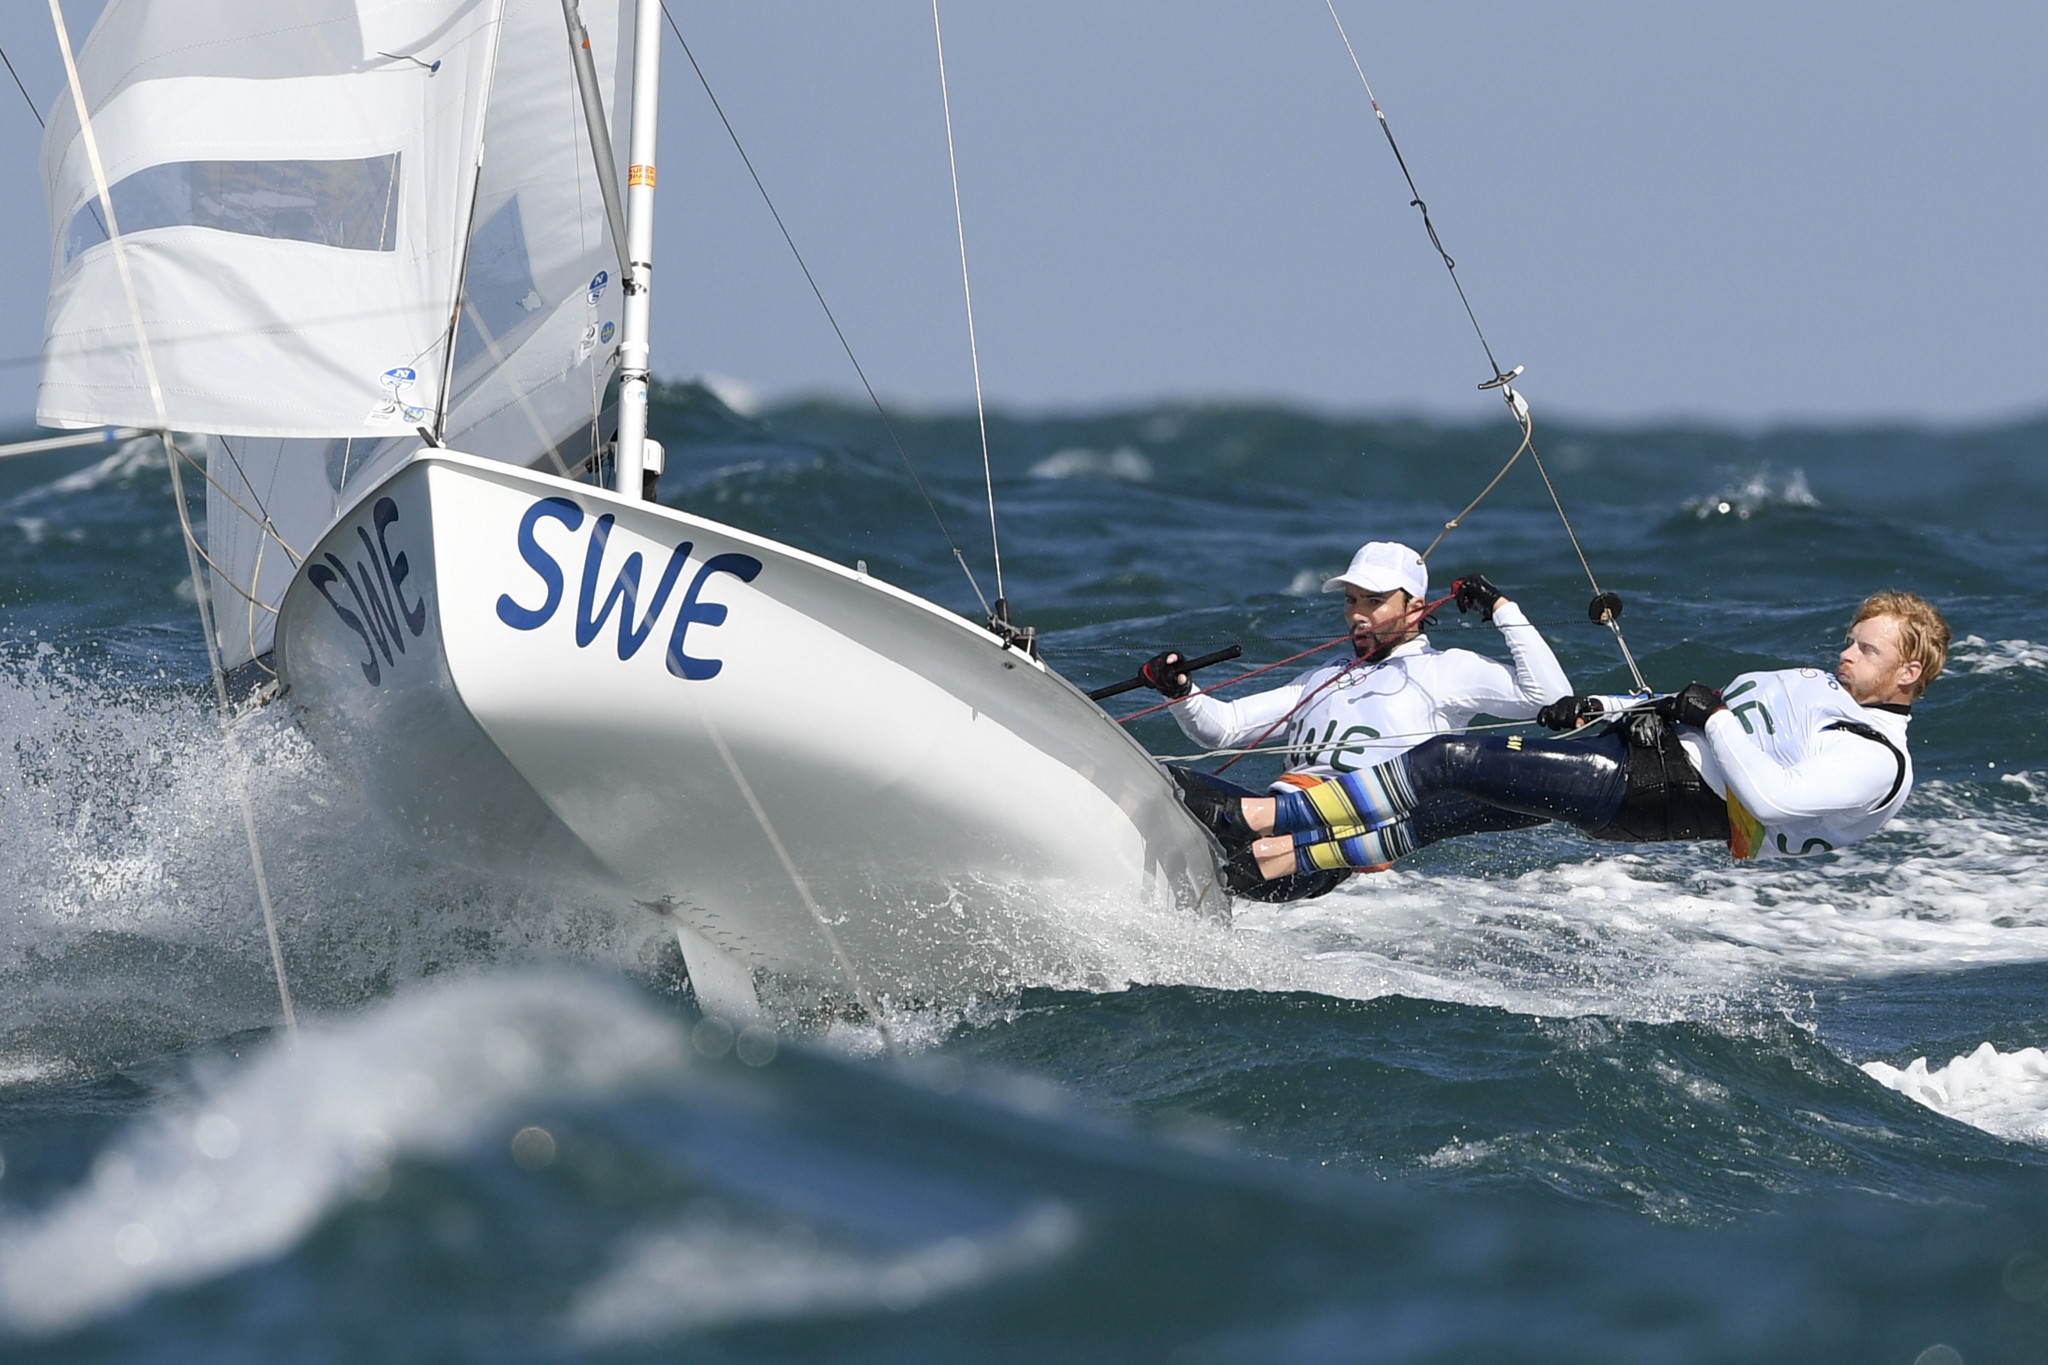 Sweden’s Anton Dahlberg Dahlberg and Fredrik Bergström hold the overall lead in the men’s event after the first day of racing at the 470 World Championships on Enoshima Bay in Japan ©Getty Images